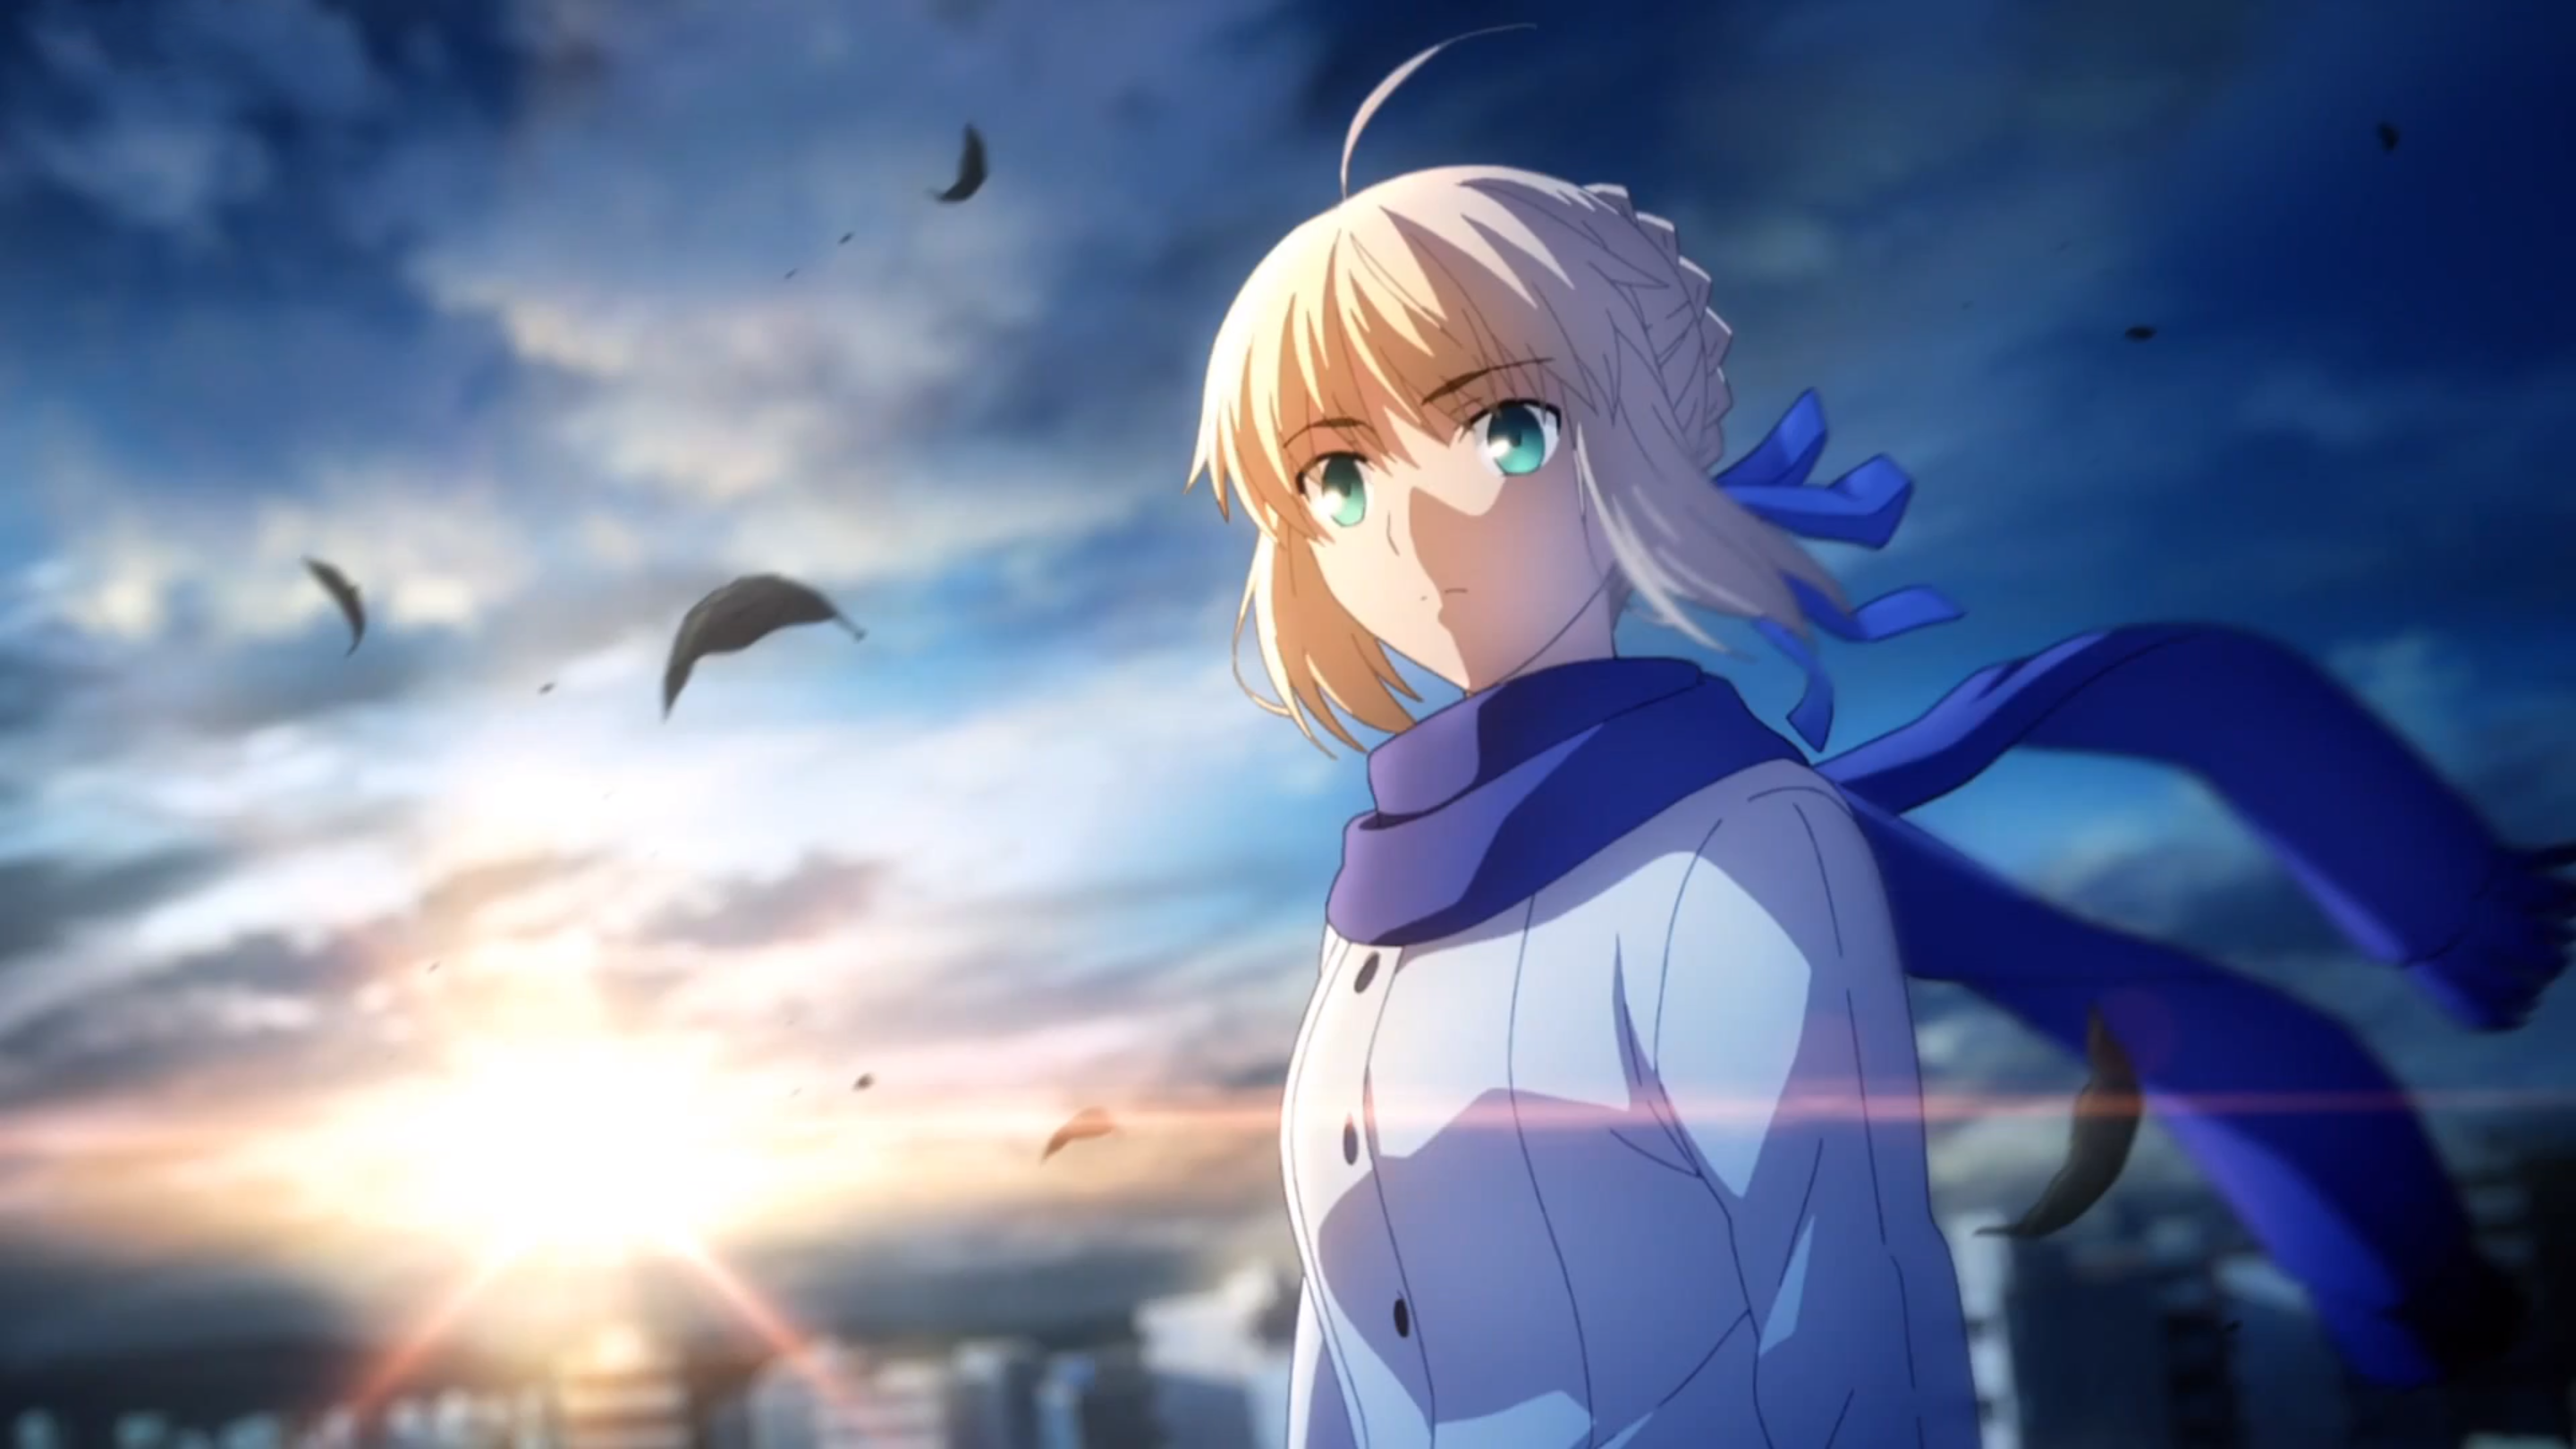 1300+ Saber (Fate Series) HD Wallpapers and Backgrounds